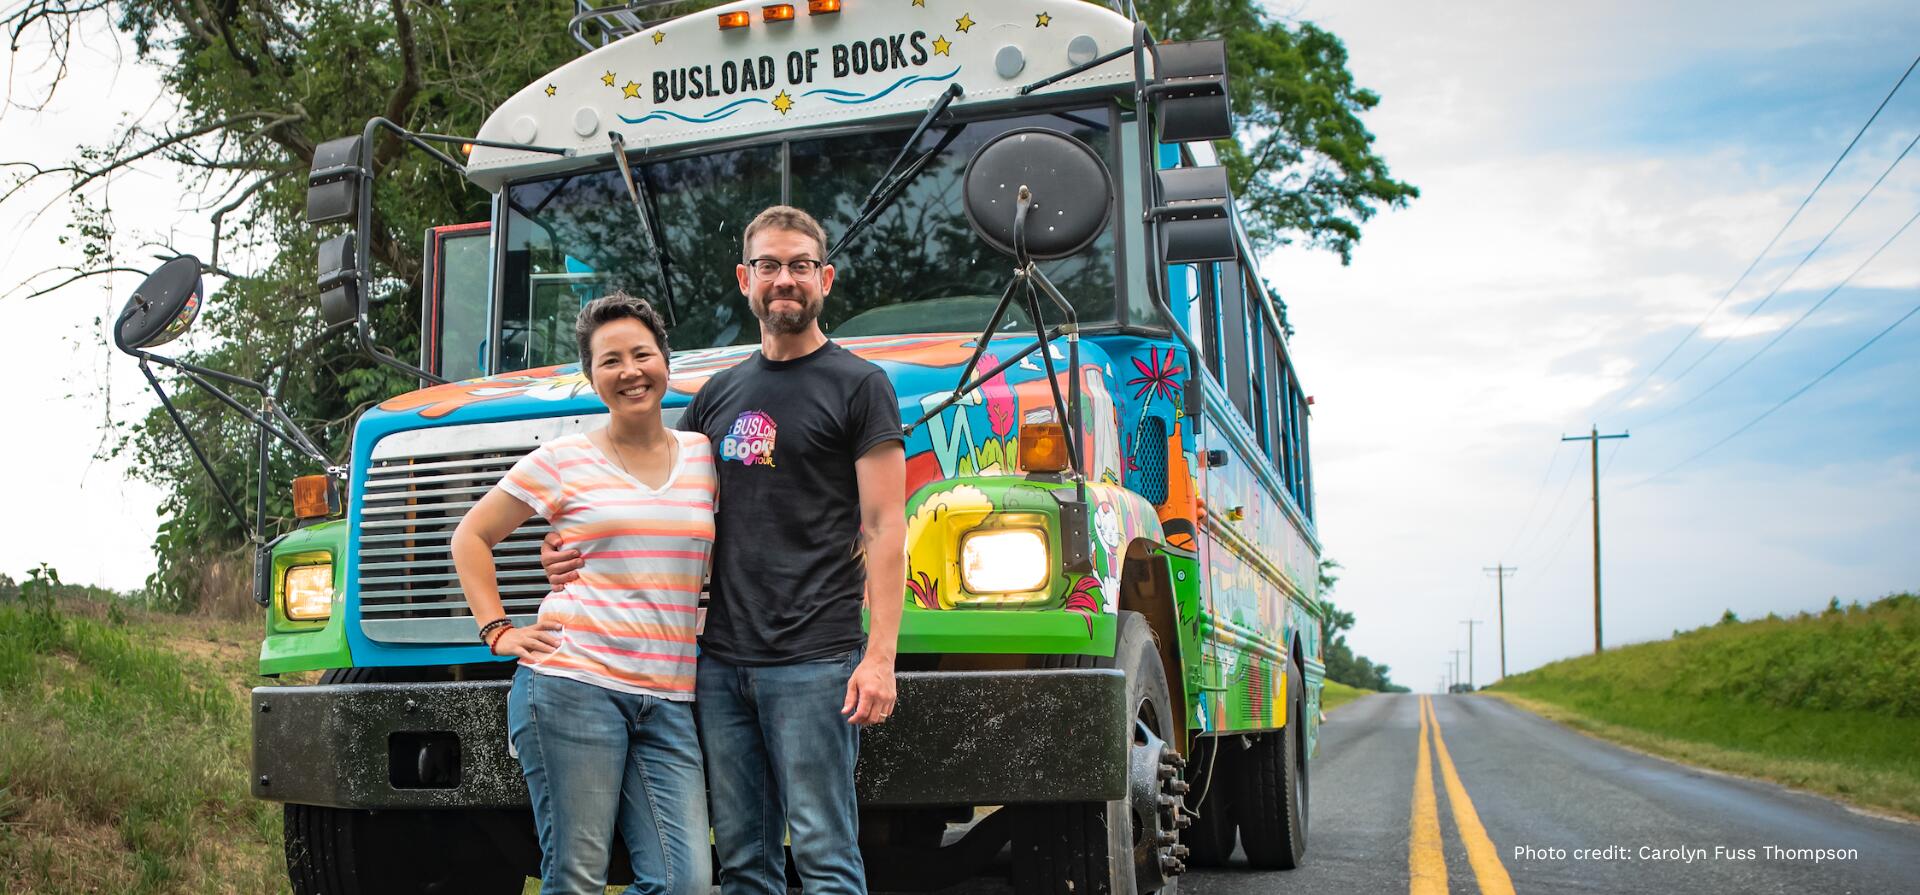 Busload of Books Tour Stopping at Columbia May 24